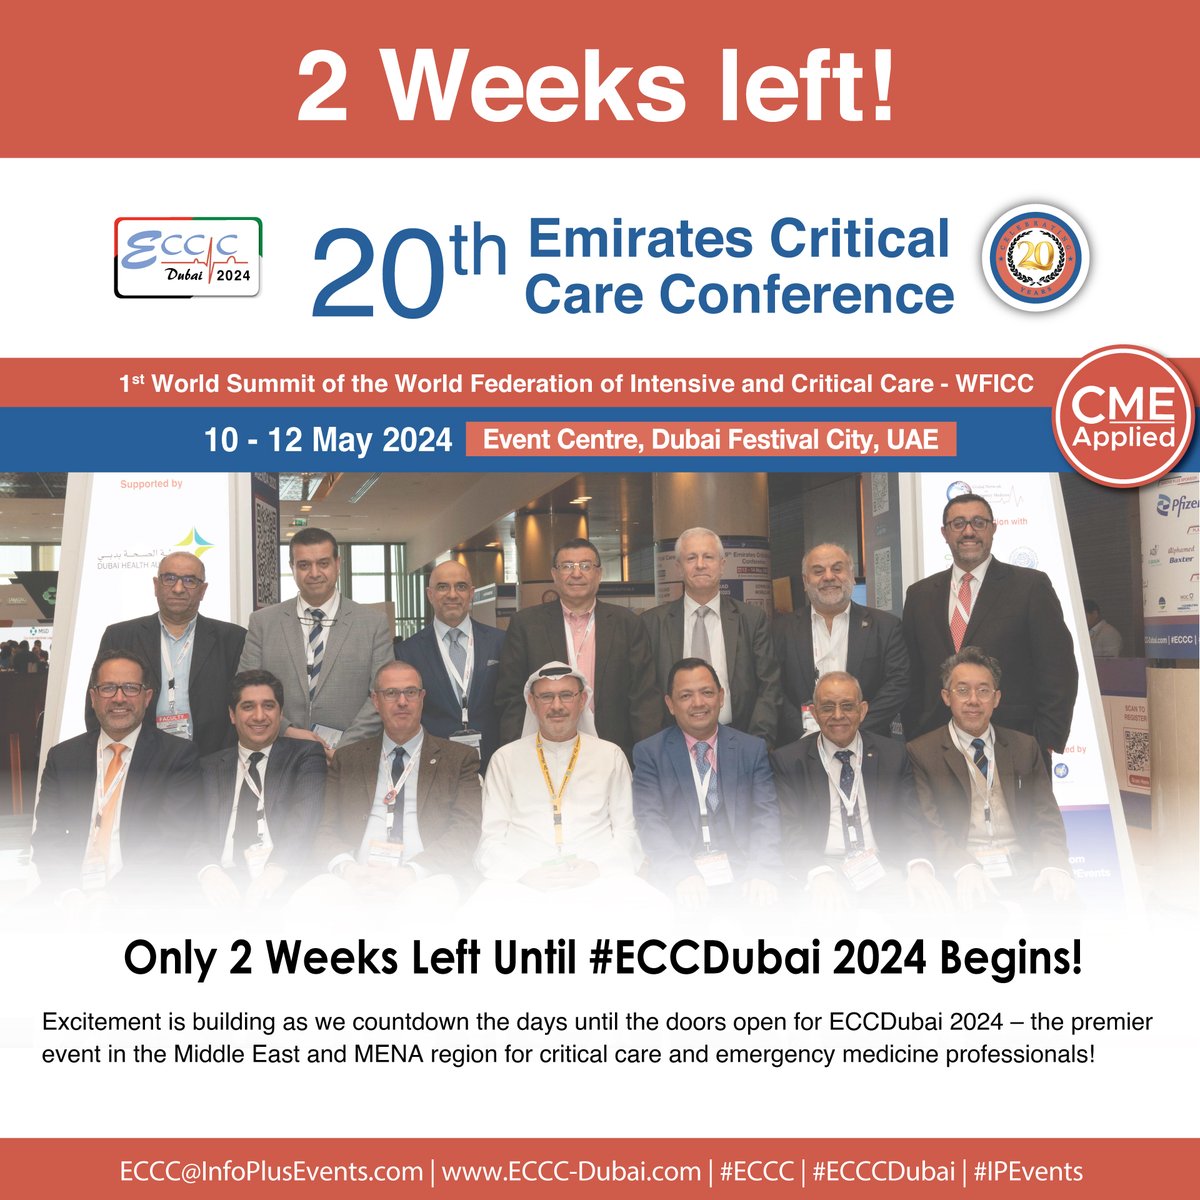 Only 2 Weeks Left Until #ECCDubai 2024 Begins! Get ready to learn from over 200 international, regional, and local speakers, who will share their expertise and insights on the latest advancements in critical care & emergency medicine. Reg @ bit.ly/Reg2ECCC24 #EmiratesCCC